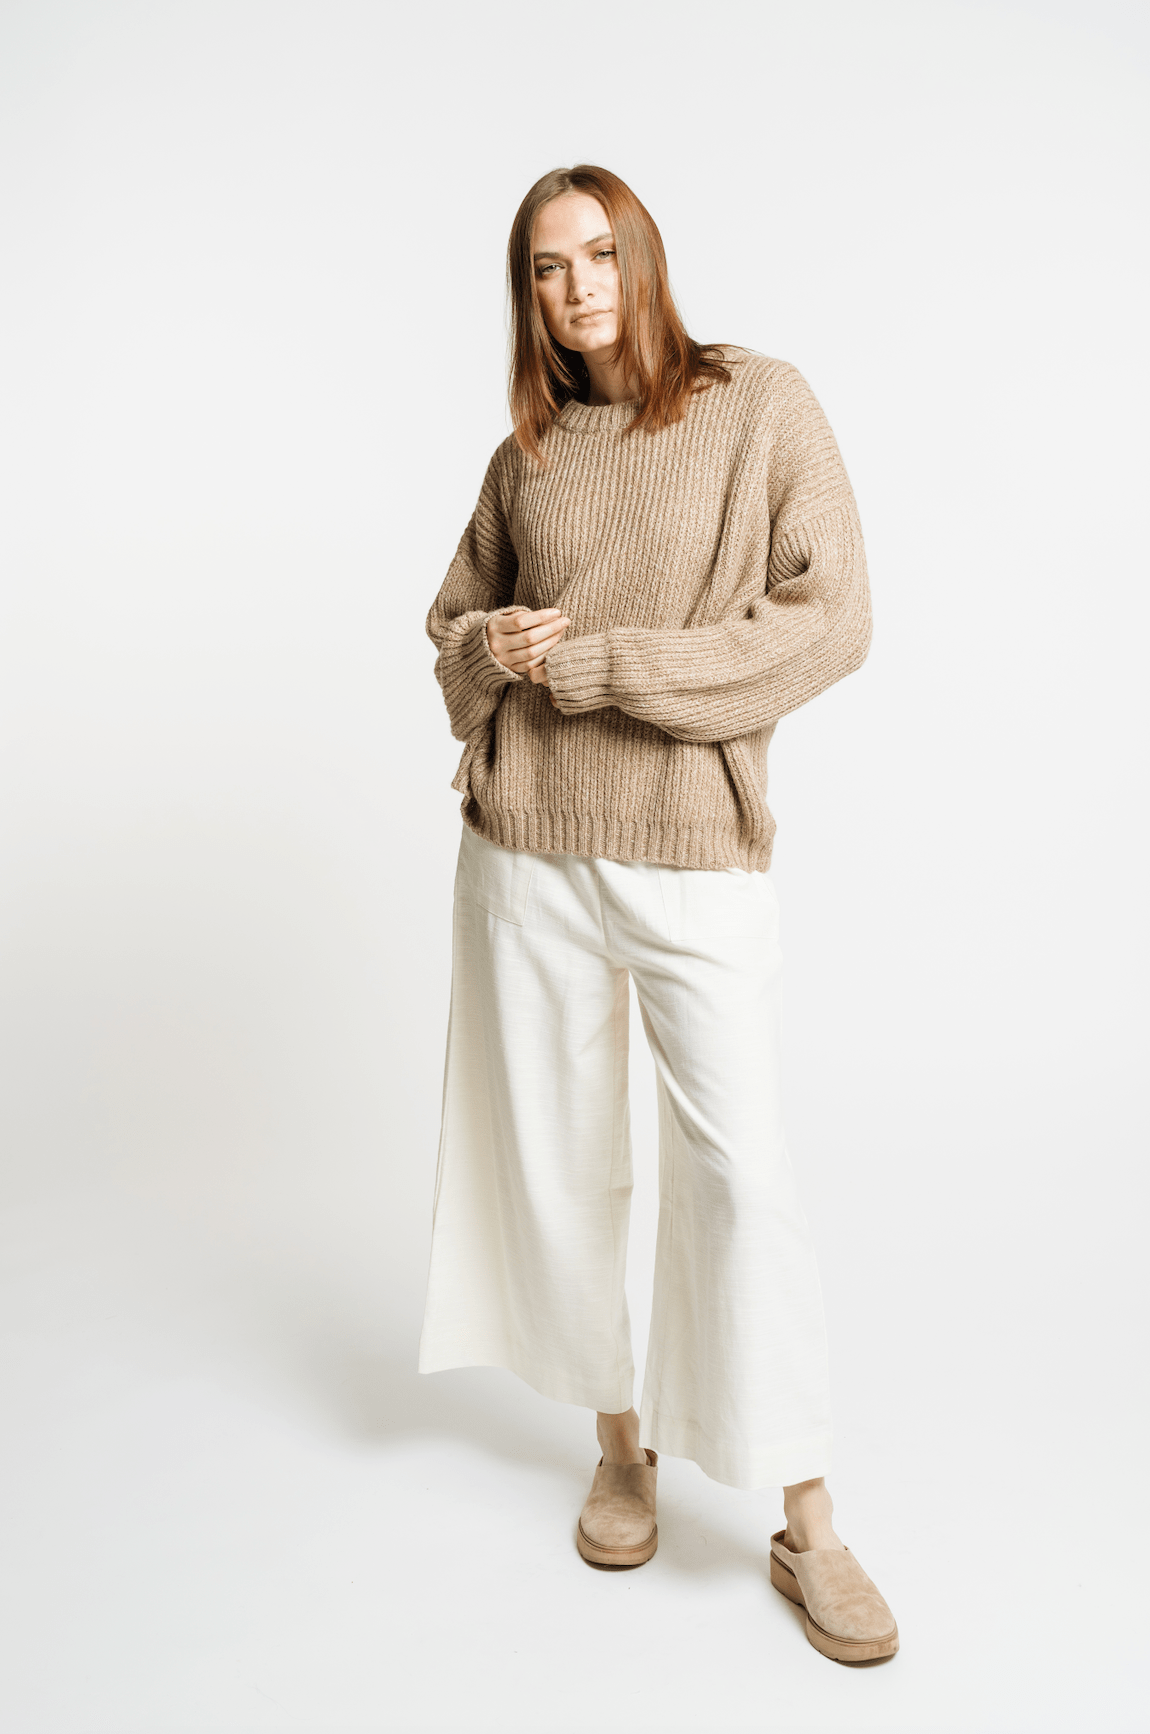 The model is wearing a Field Sweater - Caramel and white wide leg pants.